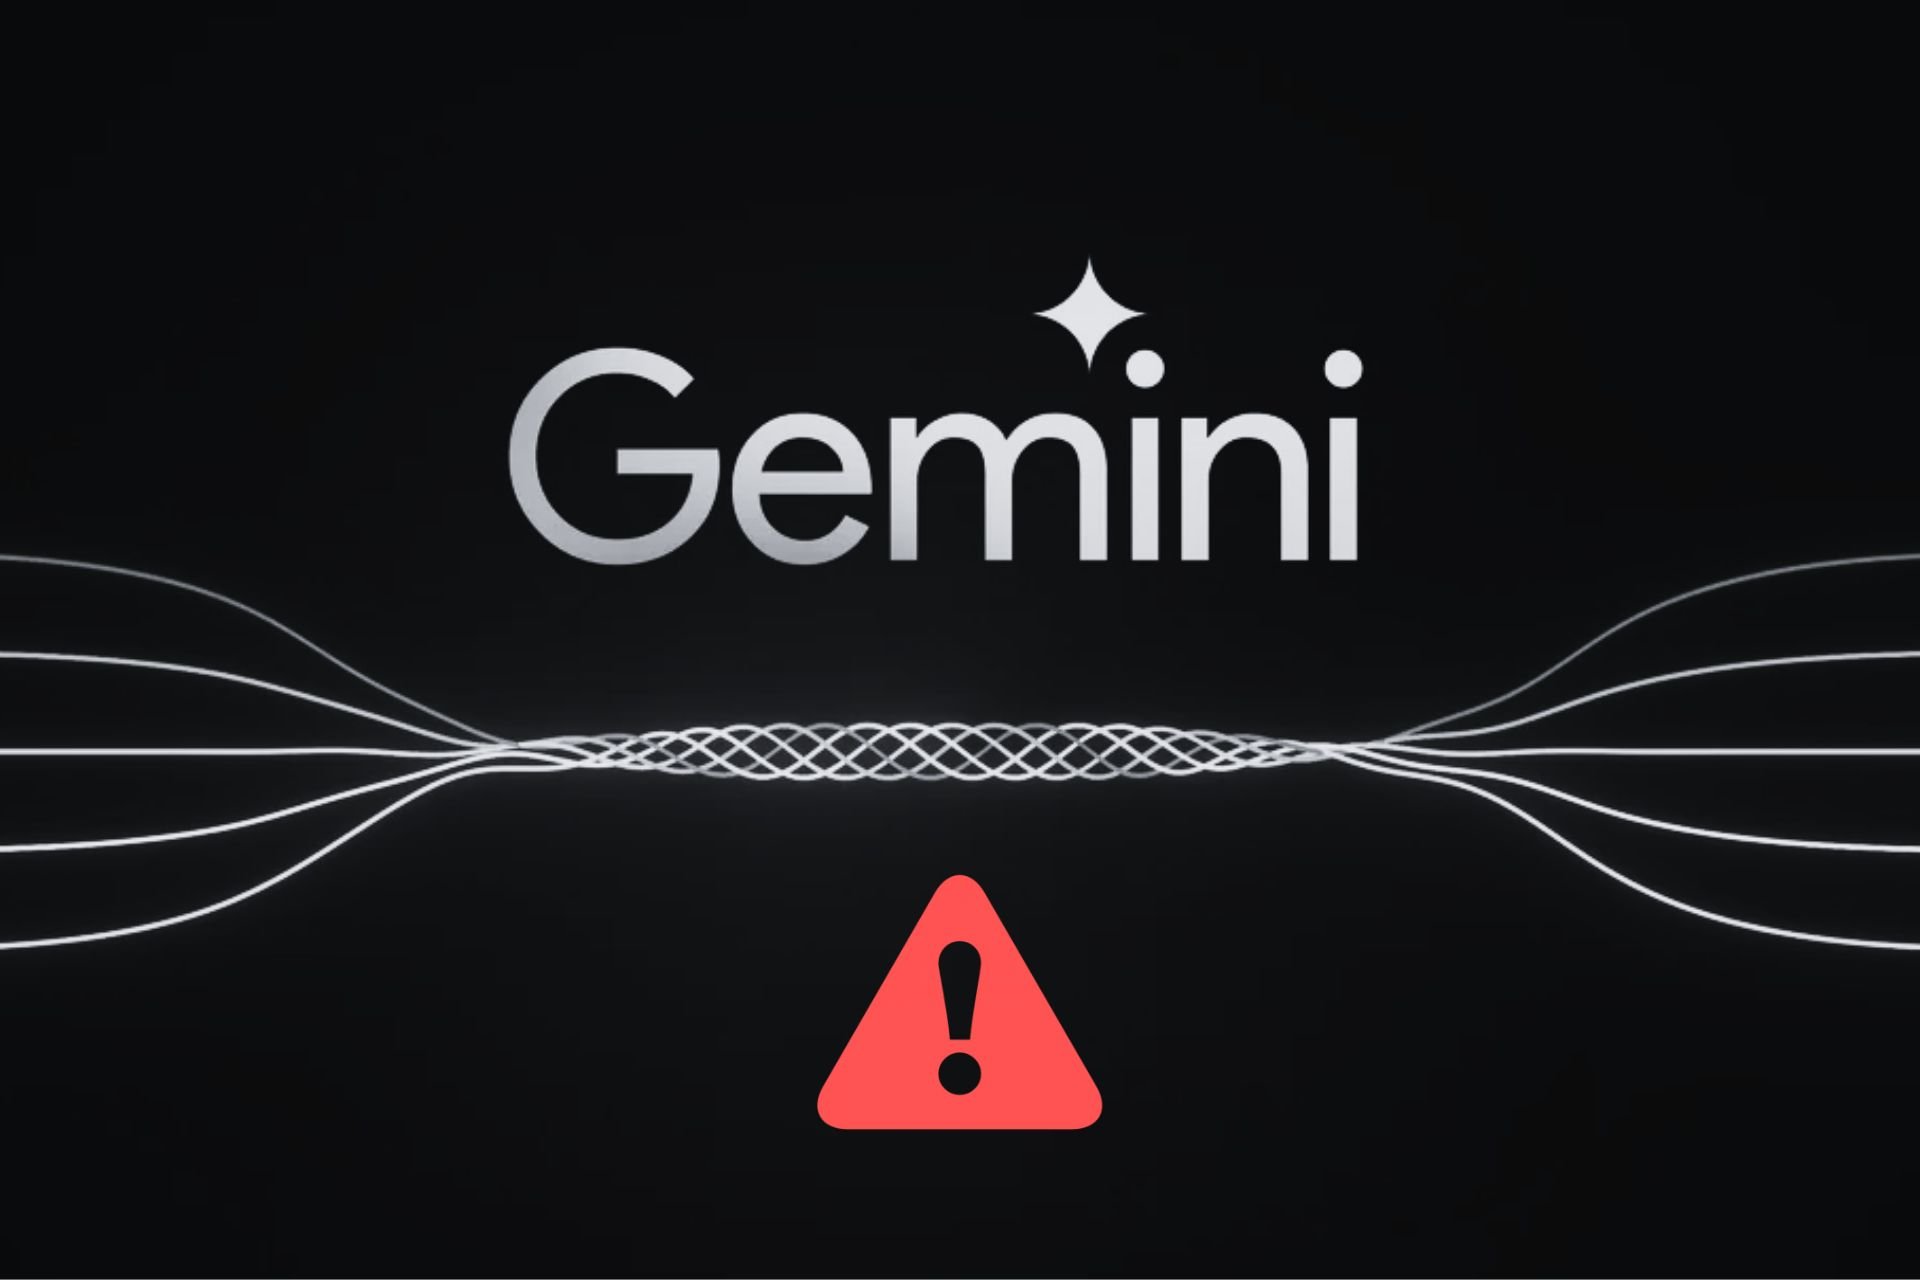 Gemini AI errors lead to offensive and inappropriate generations